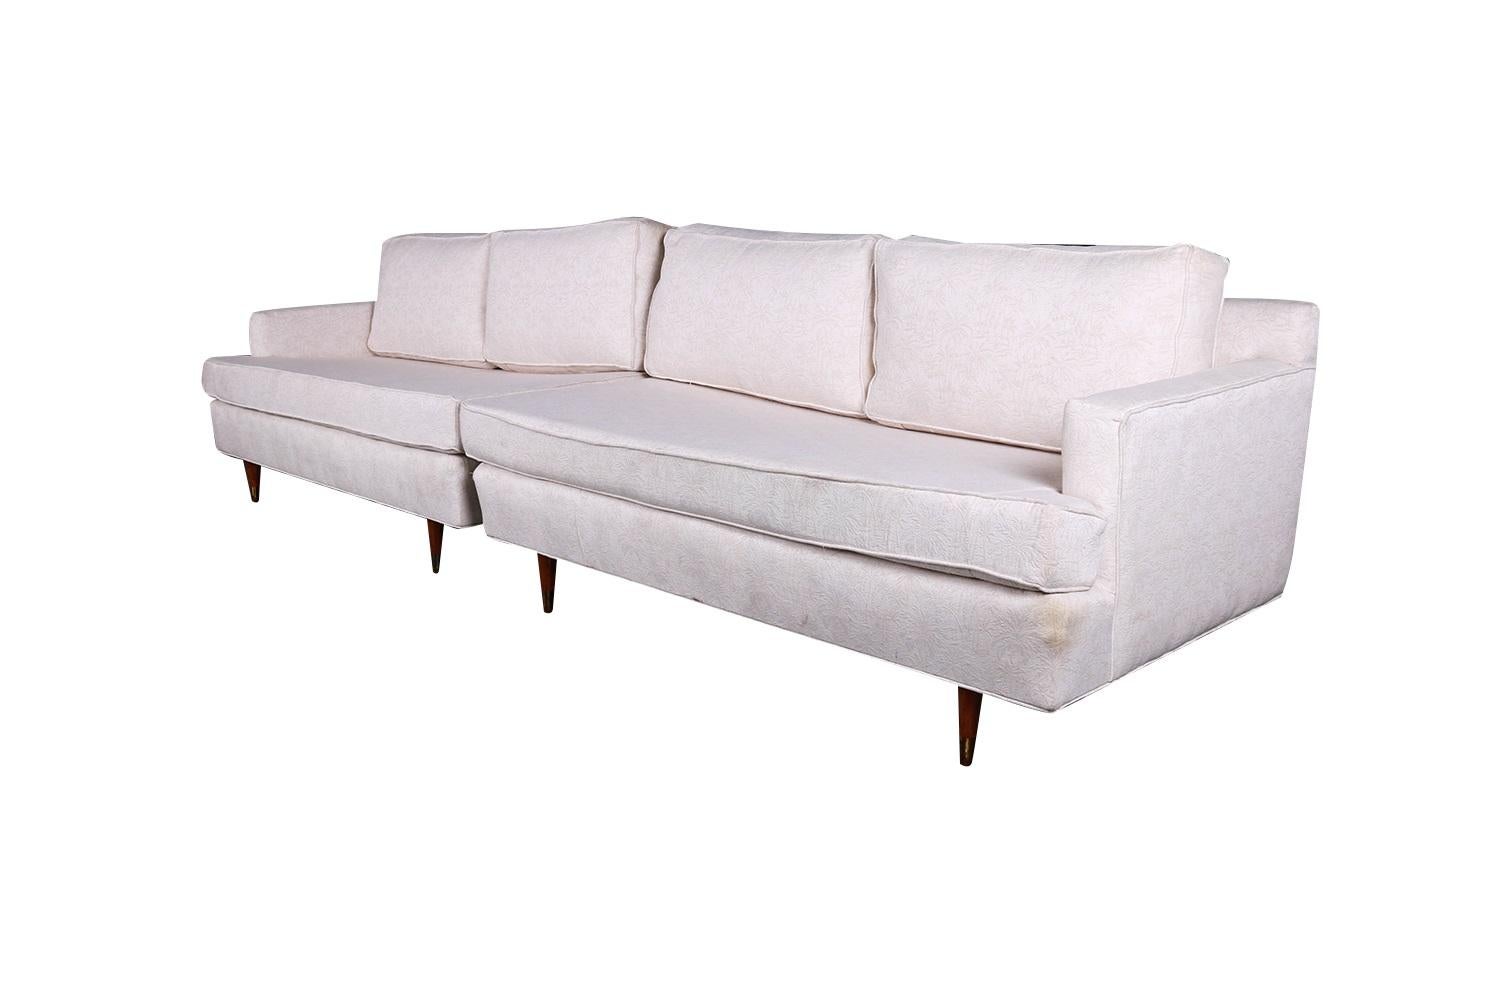 A beautiful pair of Mid-Century Modern sofas each with an appealing design that allows them to be positioned either as a pair of loveseats, as a sectional with a table in the corner between them, or as a single long sofa depending on your